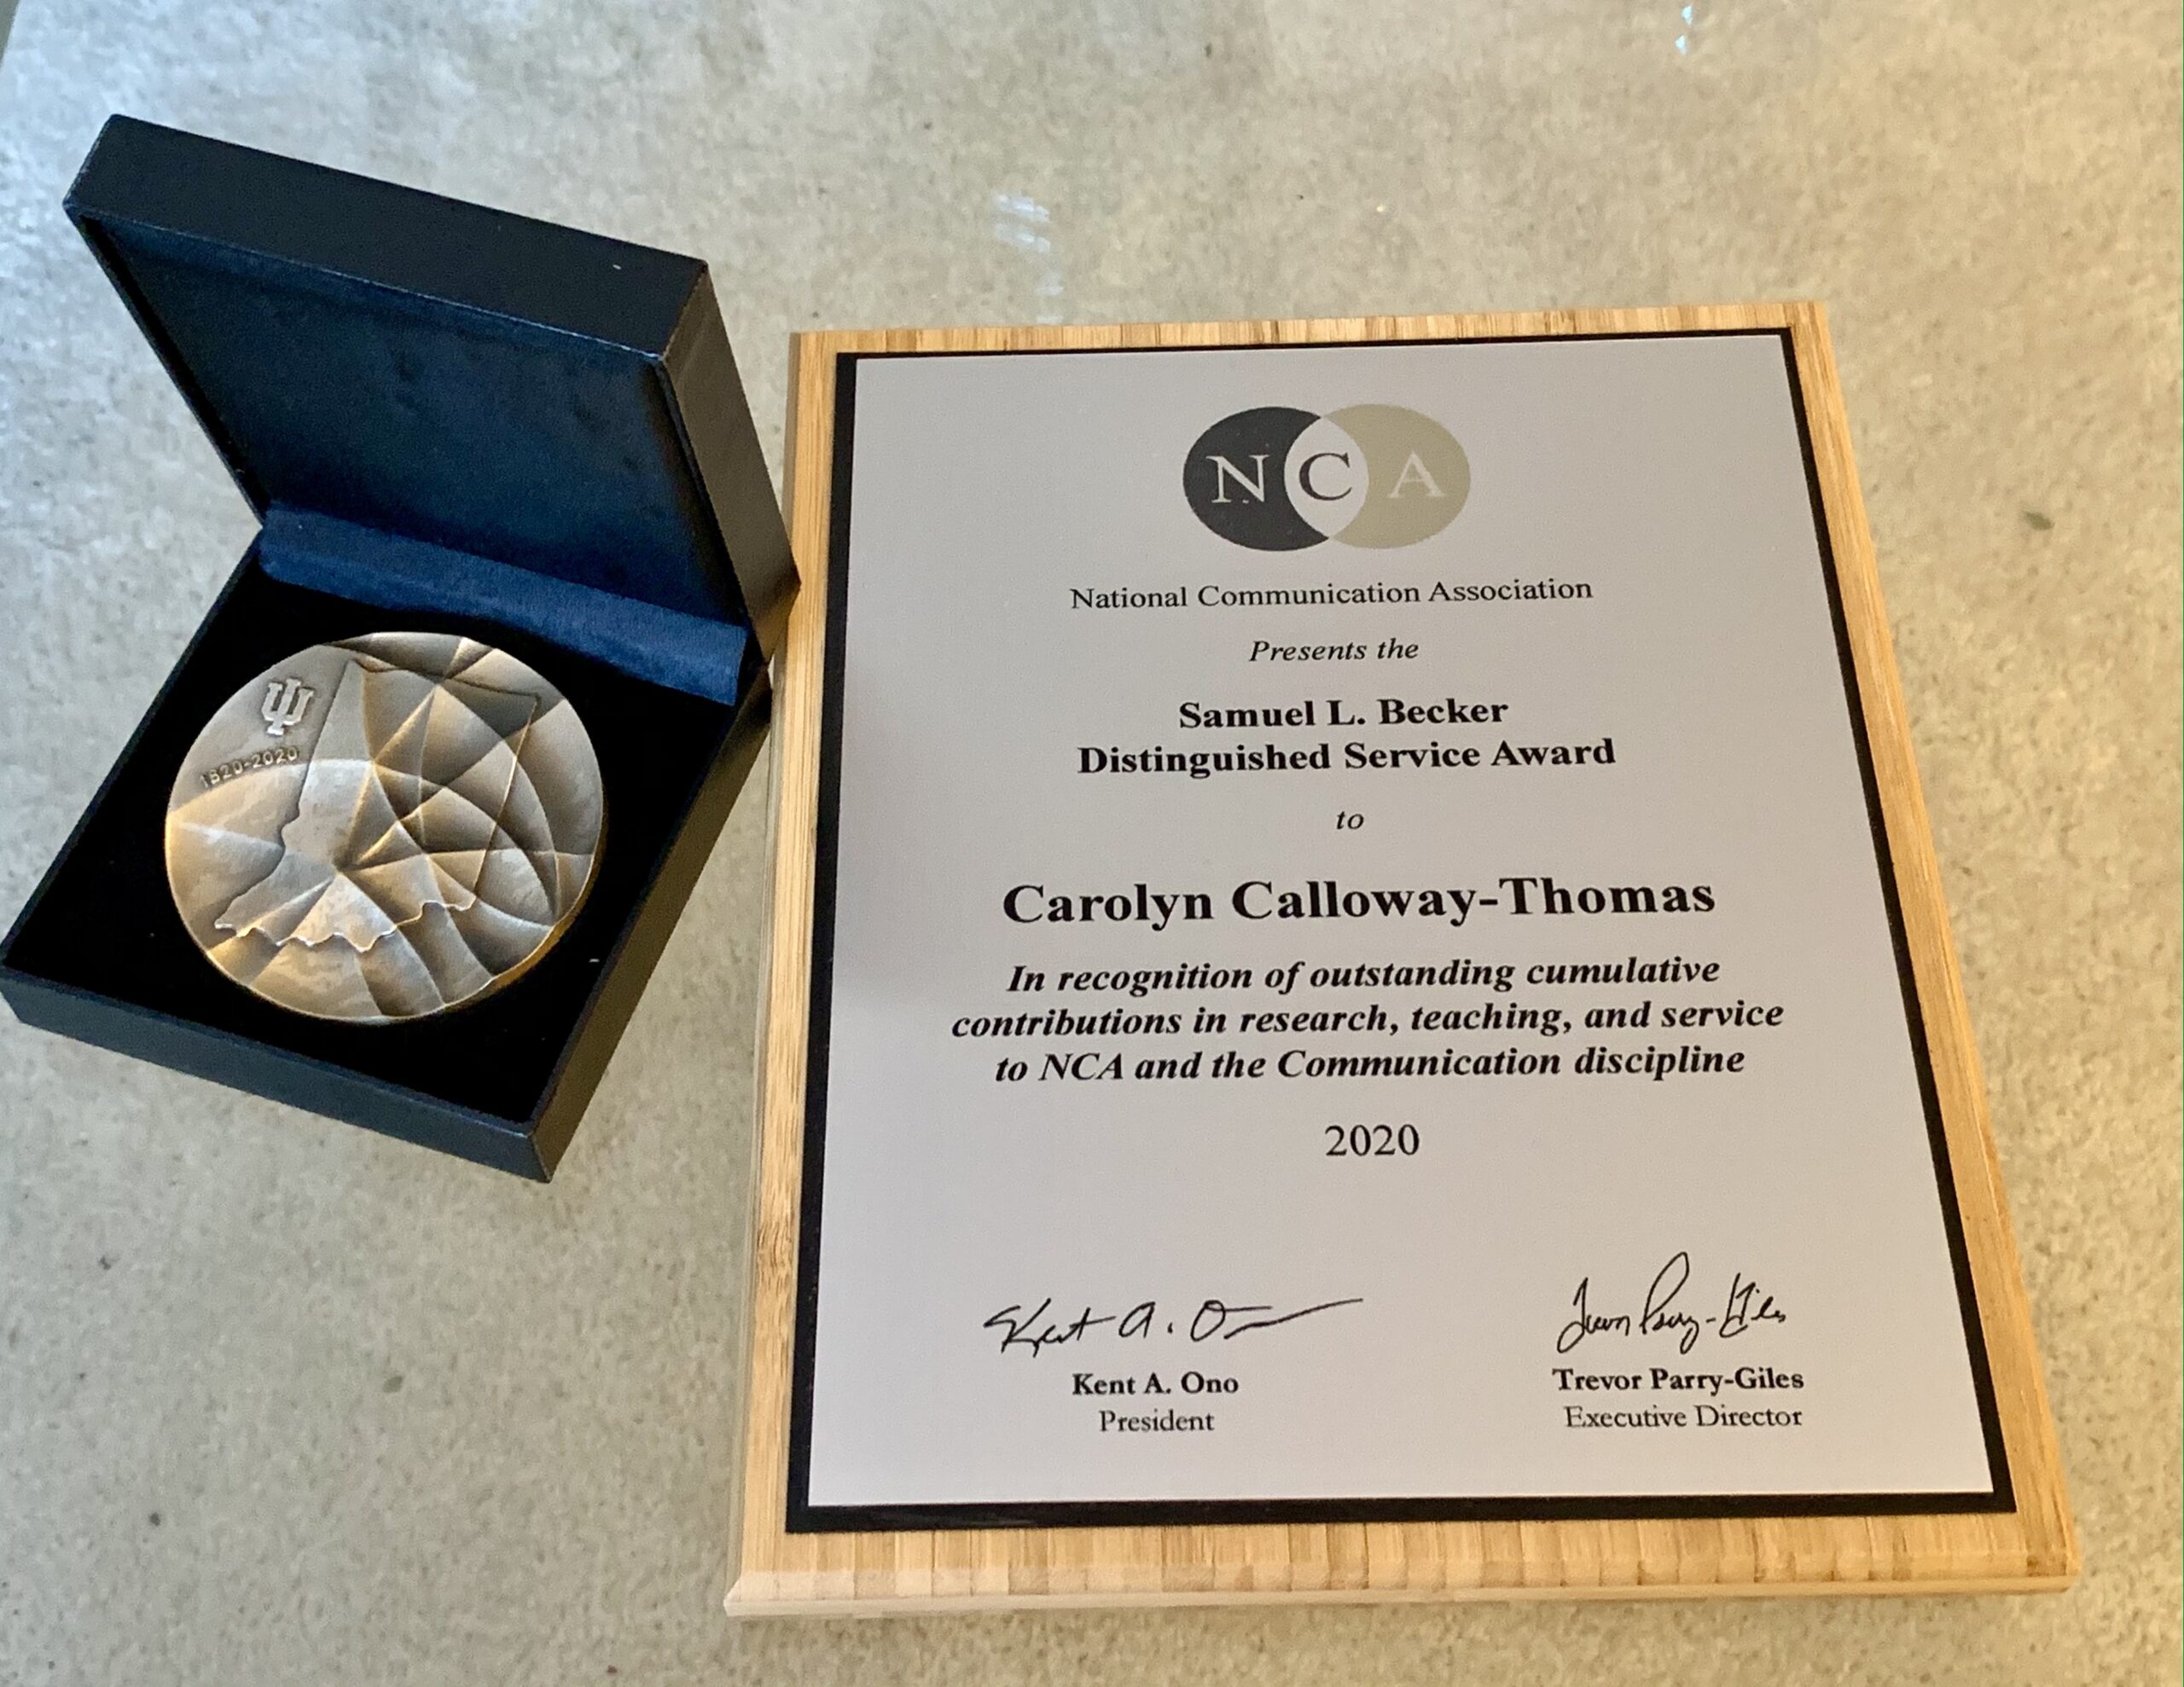 National Communication Association Presents the Samuel L. Becker Distinguished Service Award to Carolyn Calloway-Thomas. In recognition of outstanding cumulative contributions in research, teaching, and service to NCA and the Communication discipline.